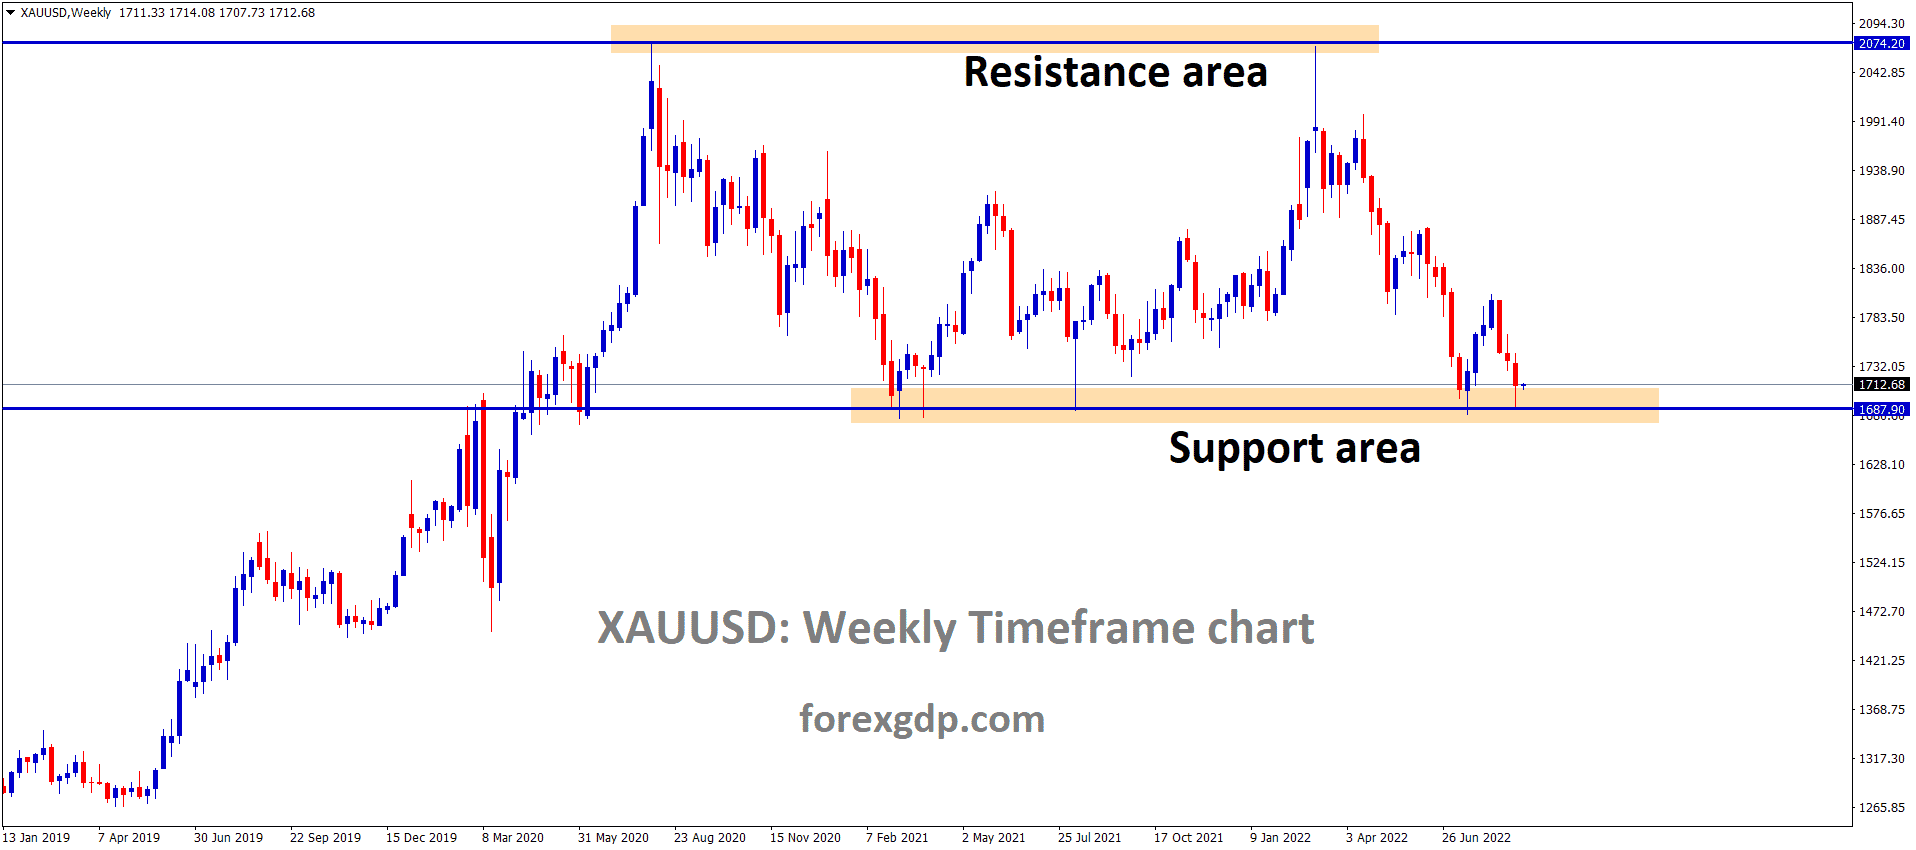 XAUUSD Gold price is moving in the Box pattern and the market has rebounded from the horizontal support area of the pattern.